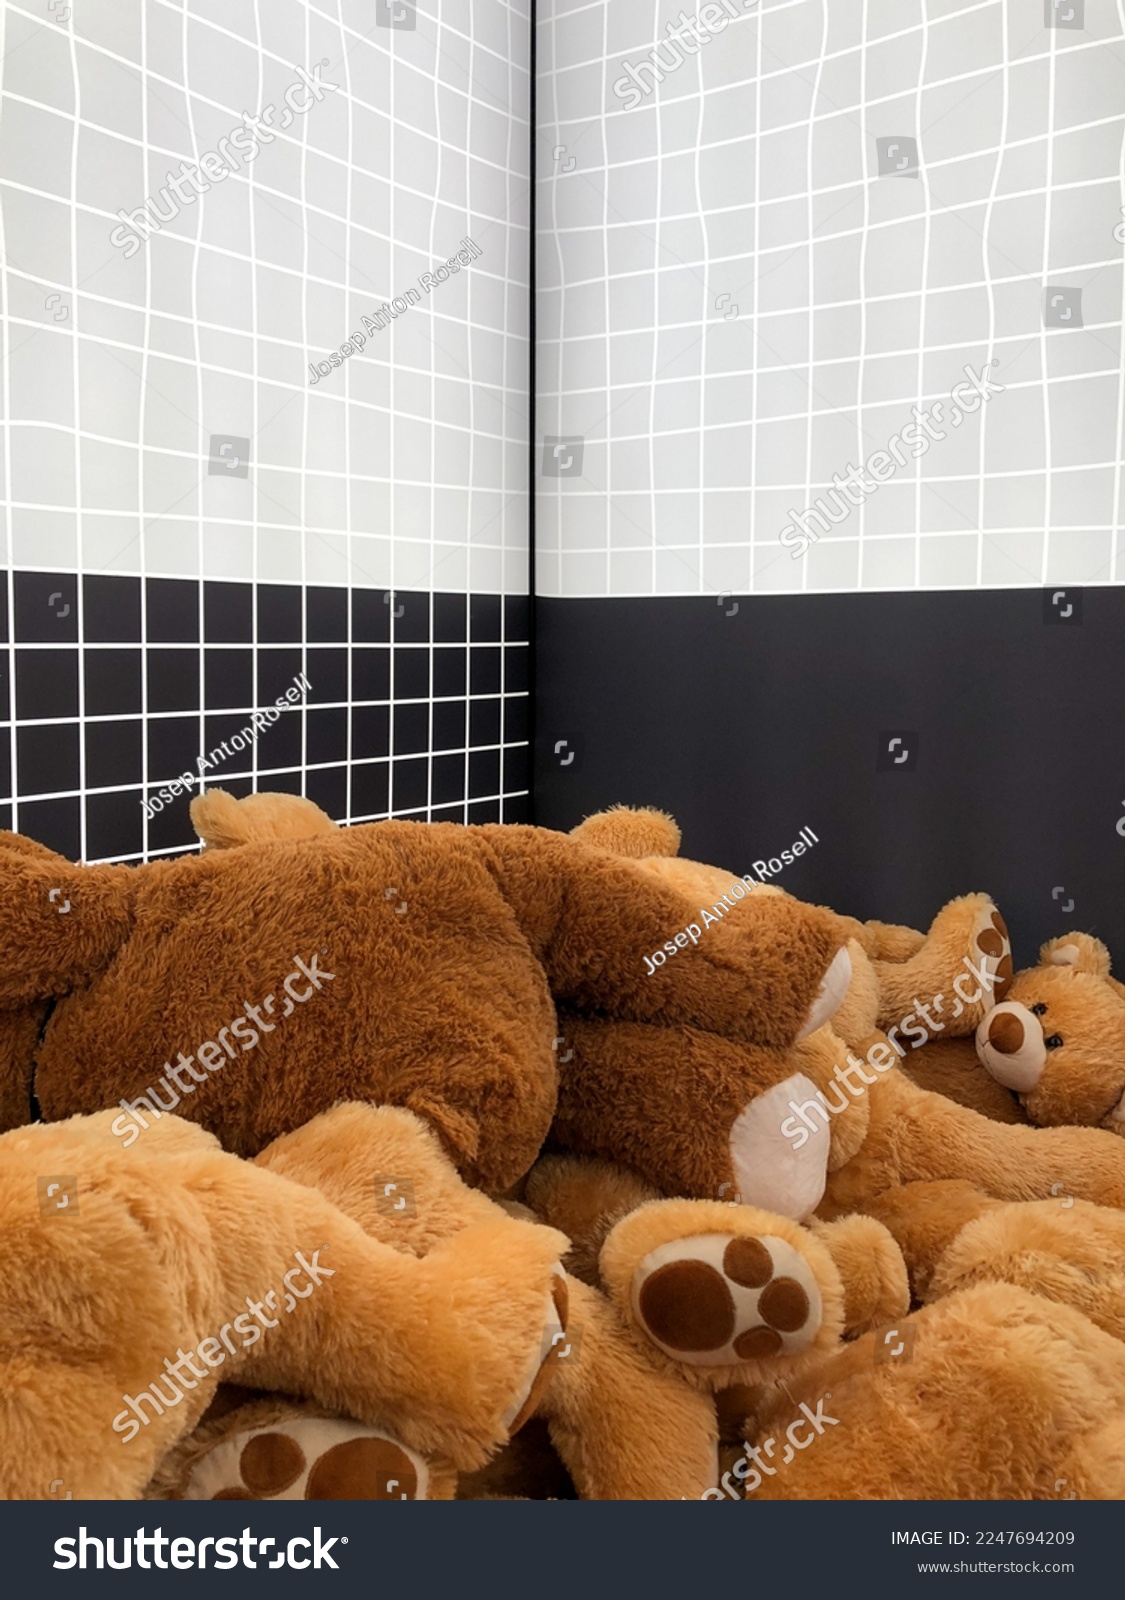 A lot of teddy bears inside a white and black room. Many fluffy bears stretched out on the floor in a room. Brown toy bears on the ground. #2247694209